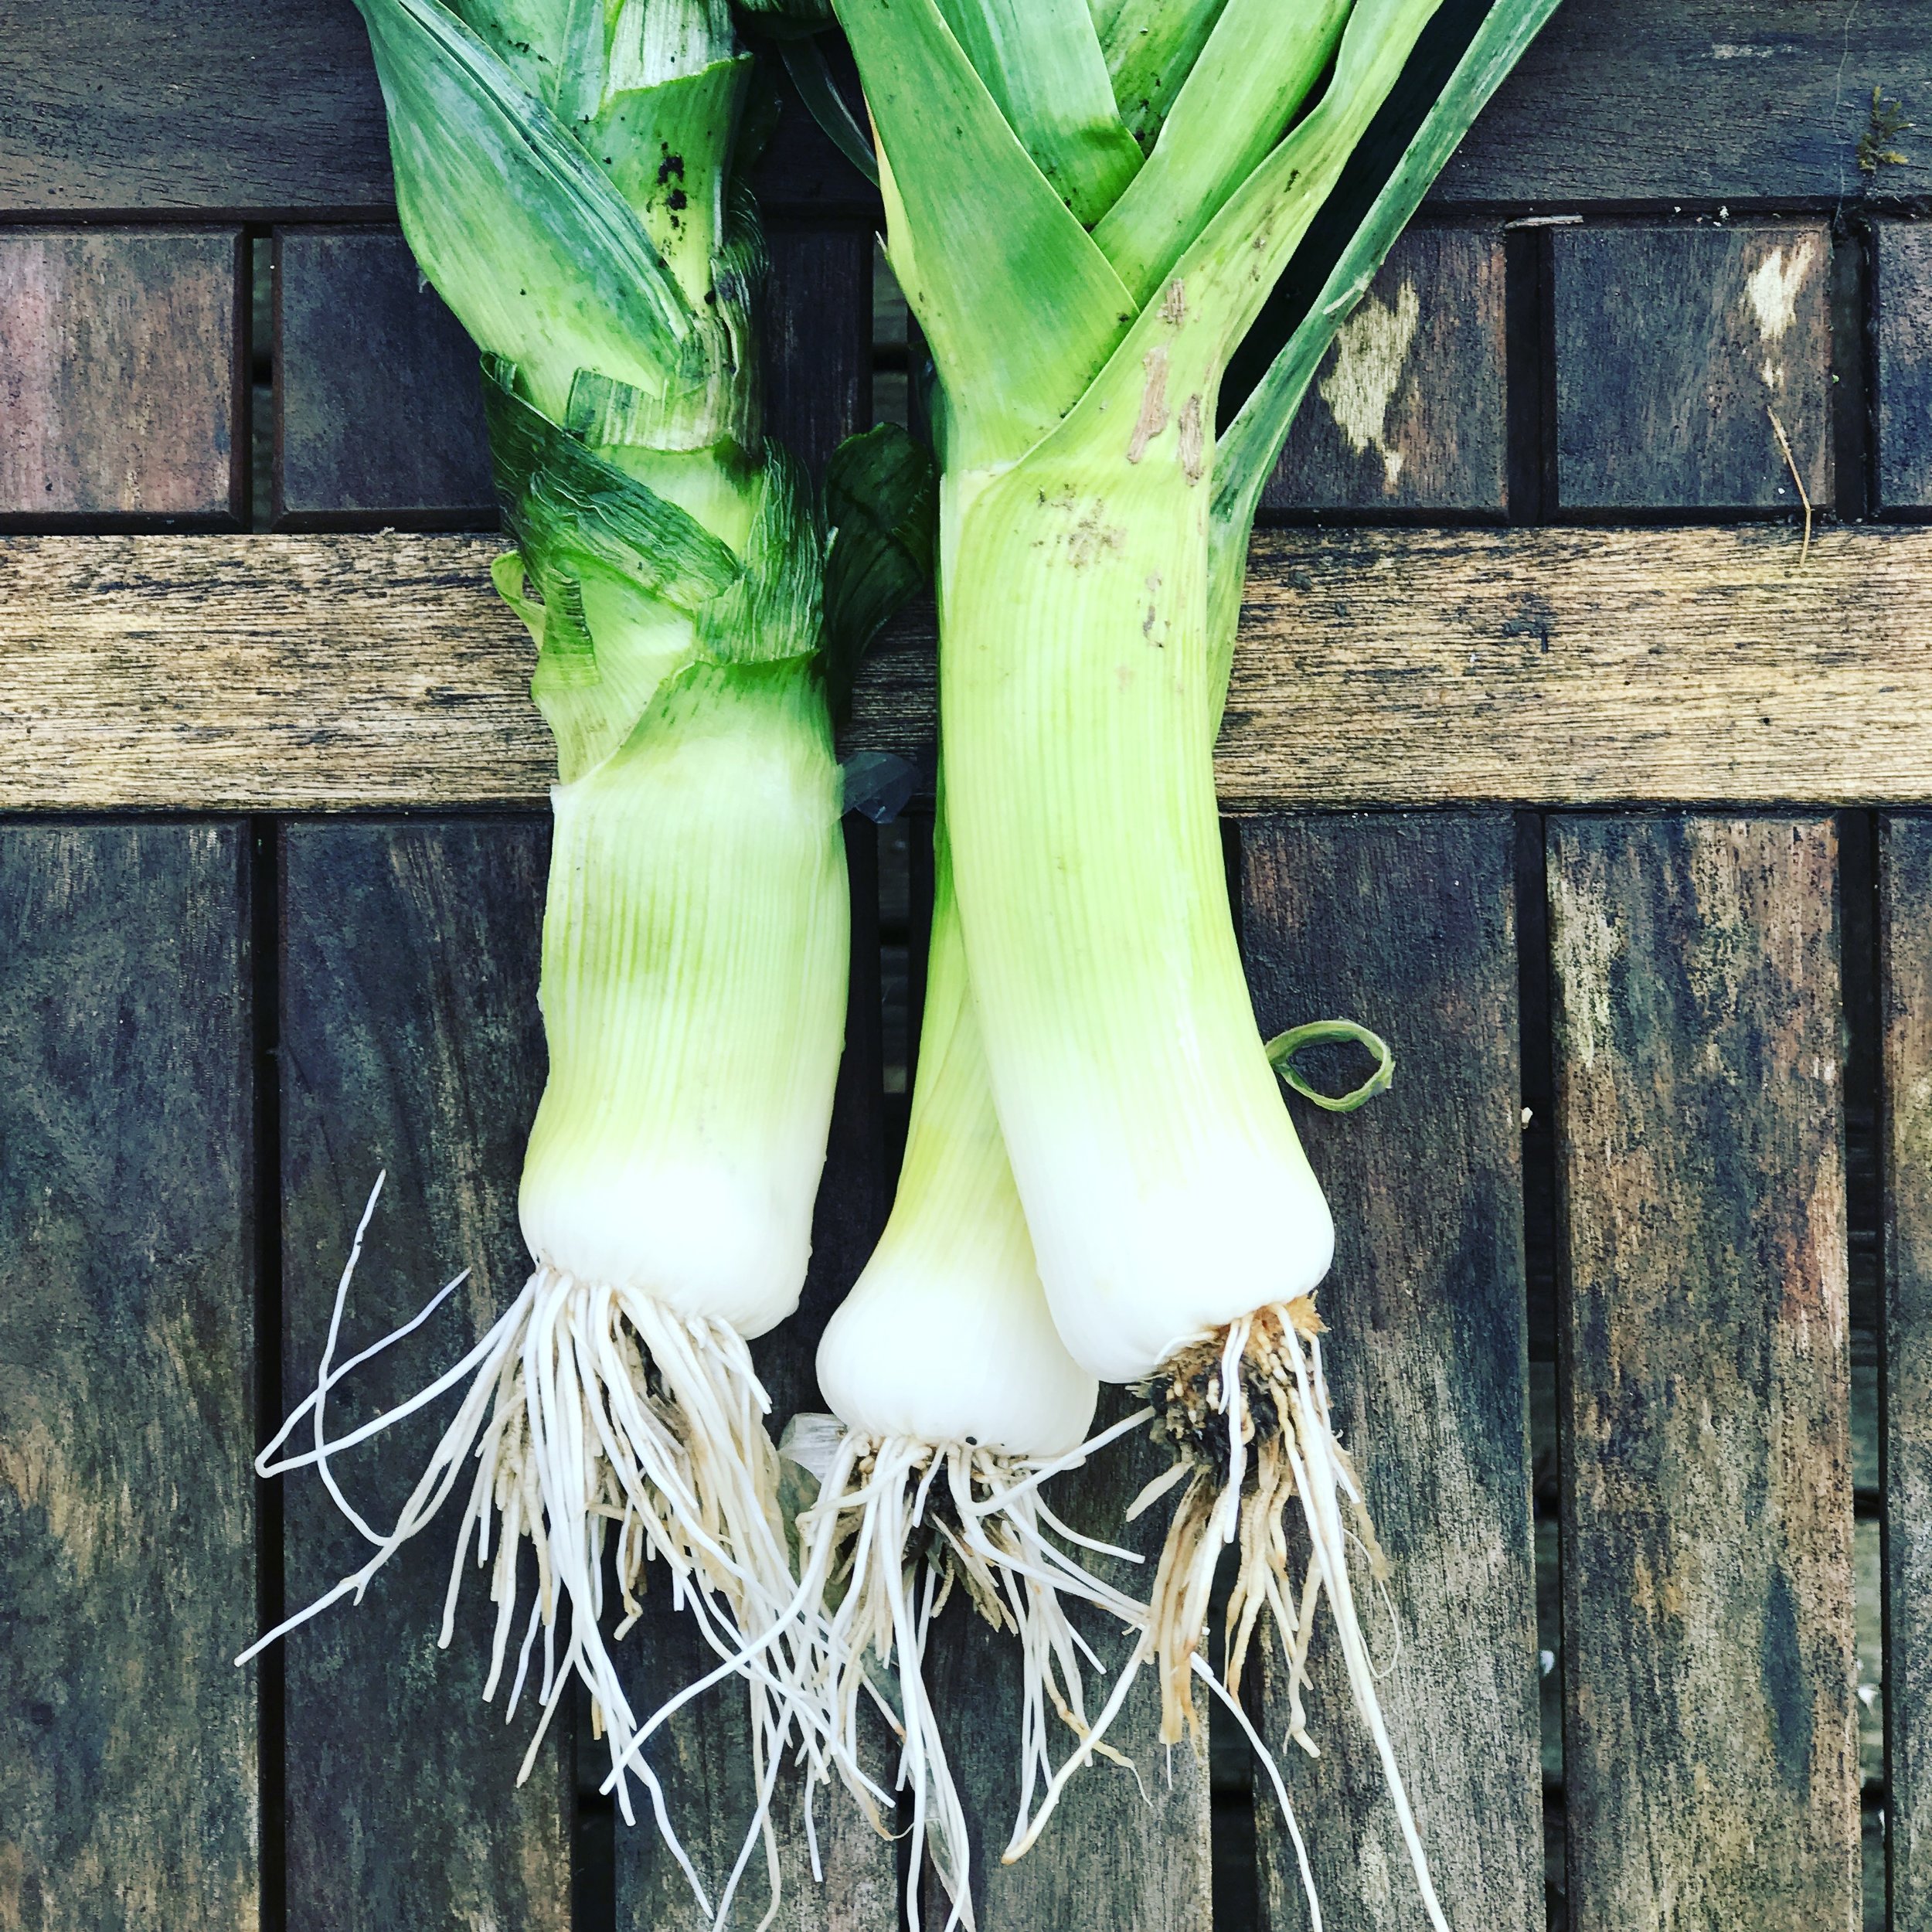 Leeks- Fresh out of the StHealthy Garden